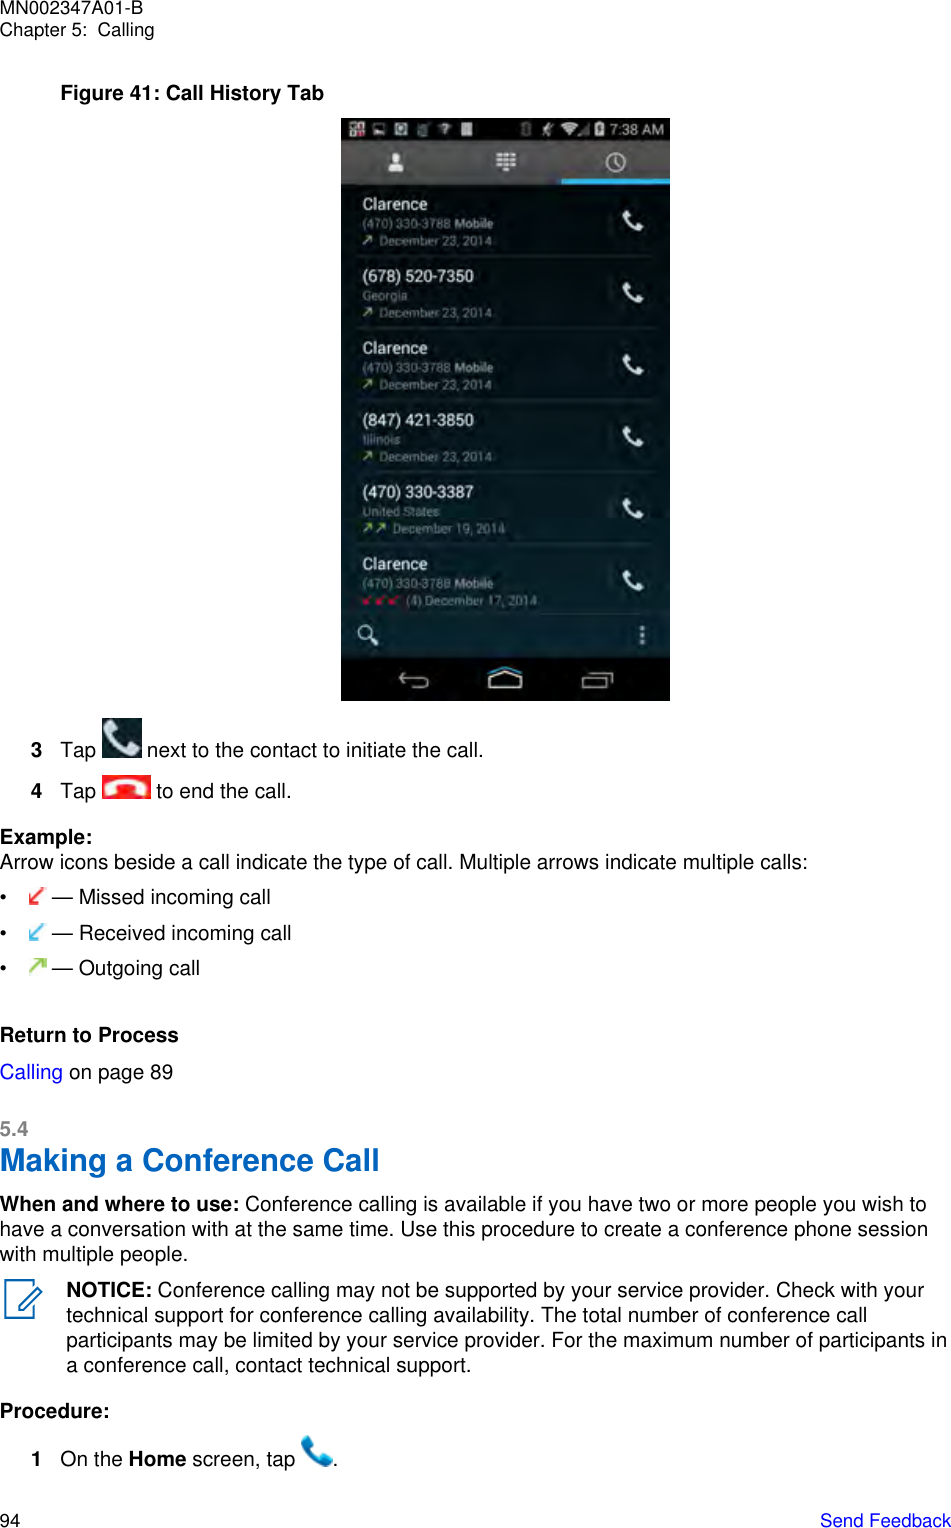 Figure 41: Call History Tab3Tap   next to the contact to initiate the call.4Tap   to end the call.Example:Arrow icons beside a call indicate the type of call. Multiple arrows indicate multiple calls:•  — Missed incoming call•  — Received incoming call•  — Outgoing callReturn to ProcessCalling on page 895.4Making a Conference CallWhen and where to use: Conference calling is available if you have two or more people you wish tohave a conversation with at the same time. Use this procedure to create a conference phone sessionwith multiple people.NOTICE: Conference calling may not be supported by your service provider. Check with yourtechnical support for conference calling availability. The total number of conference callparticipants may be limited by your service provider. For the maximum number of participants ina conference call, contact technical support.Procedure:1On the Home screen, tap  .MN002347A01-BChapter 5:  Calling94   Send Feedback